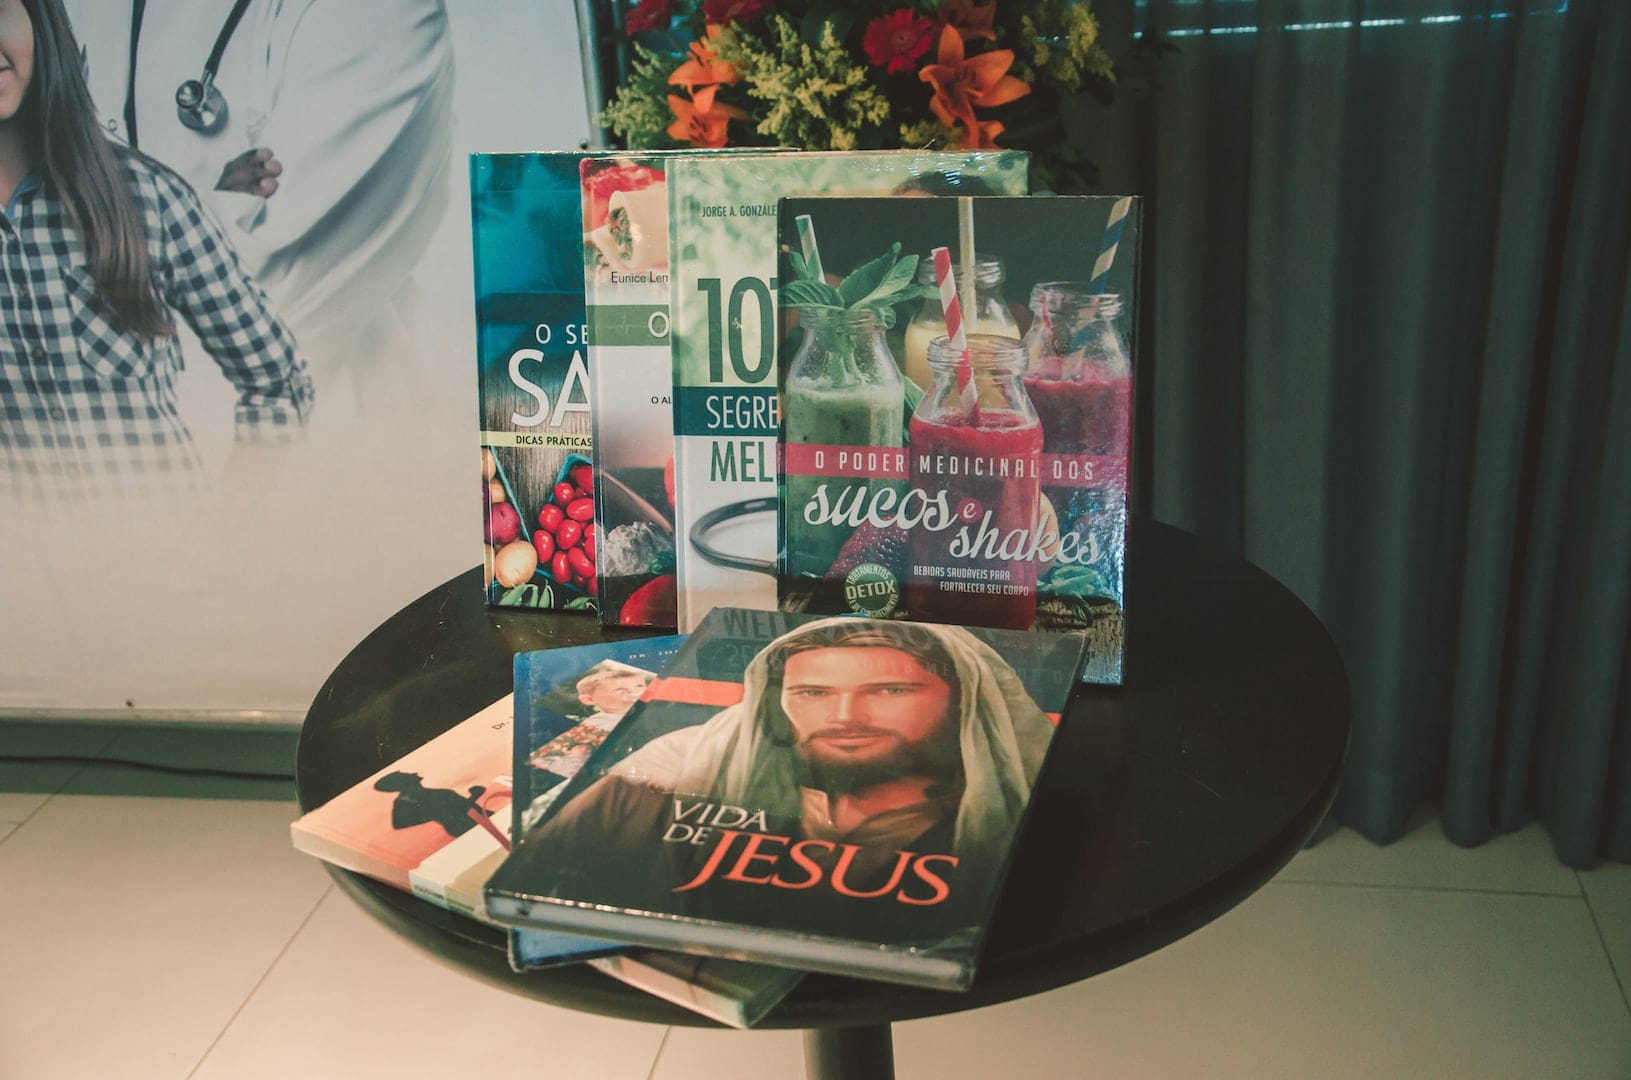 Some of the Christian health and religious books that health professionals will offer in combination with their family health consulting activities as they conduct door-to-door sales. [Photo: East-Brazilian Union Conference]